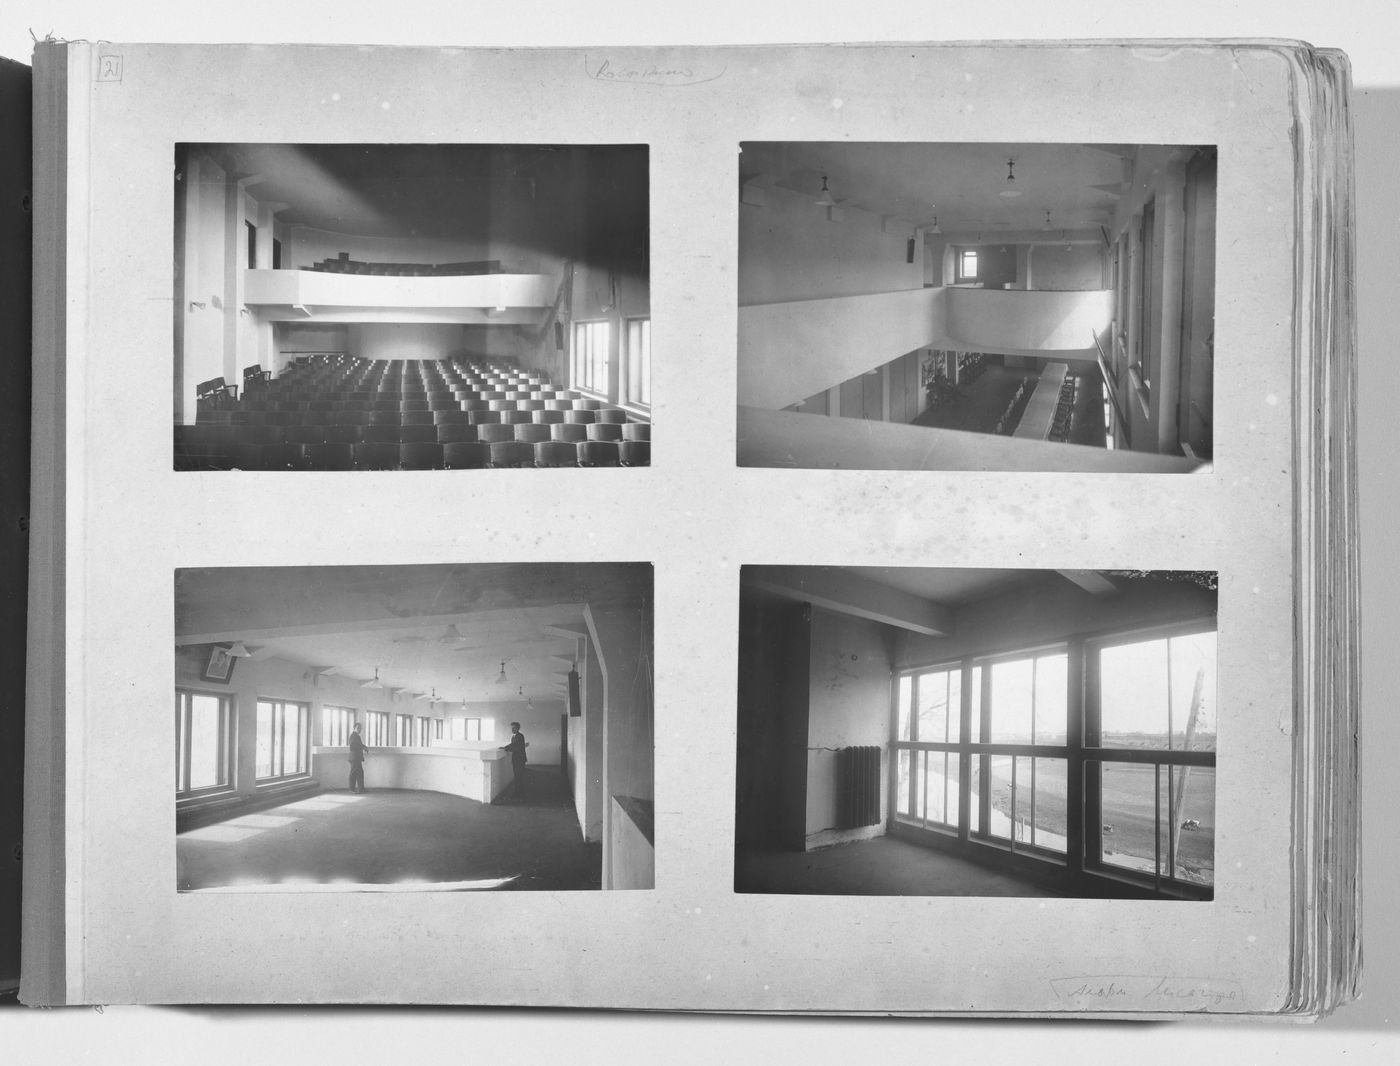 Interior views of the House-commune of transitional type communal centre, some showing Solomon Lisagor, Rostokino, Moscow